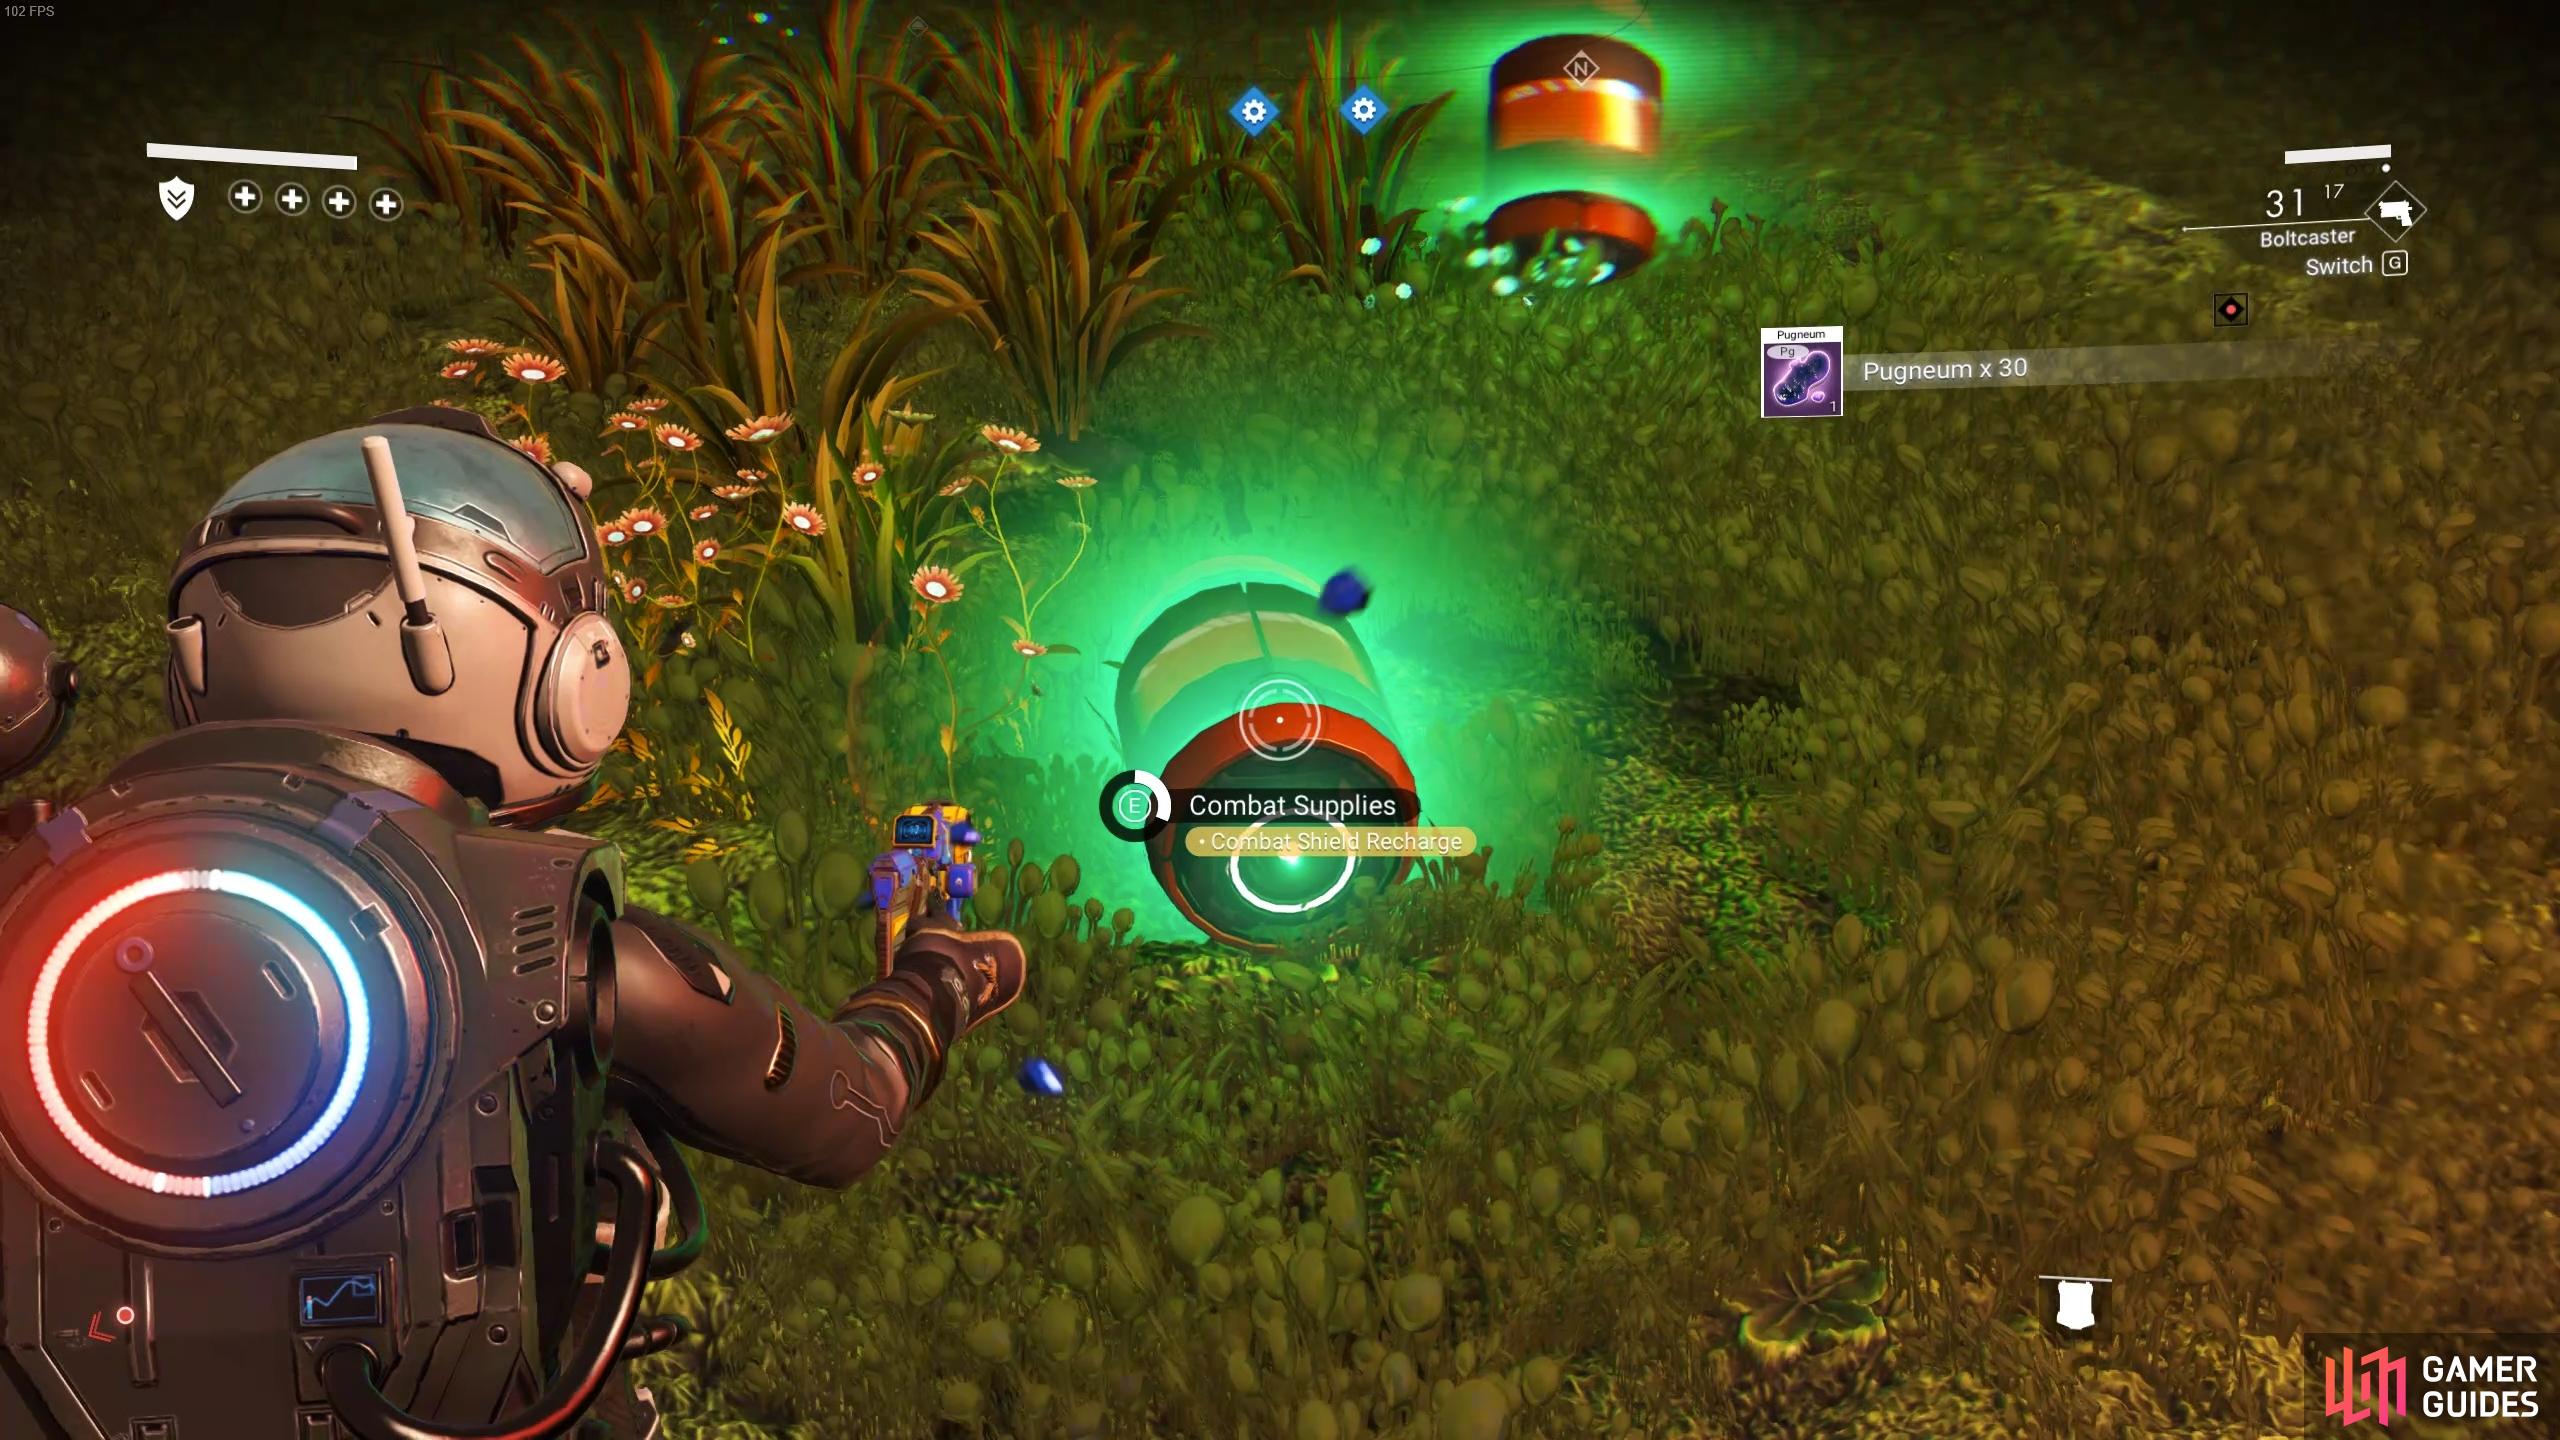 Be sure to pick up Combat Supplies from each Sentinel Drone, which replenish your vitals and provide ammunition.